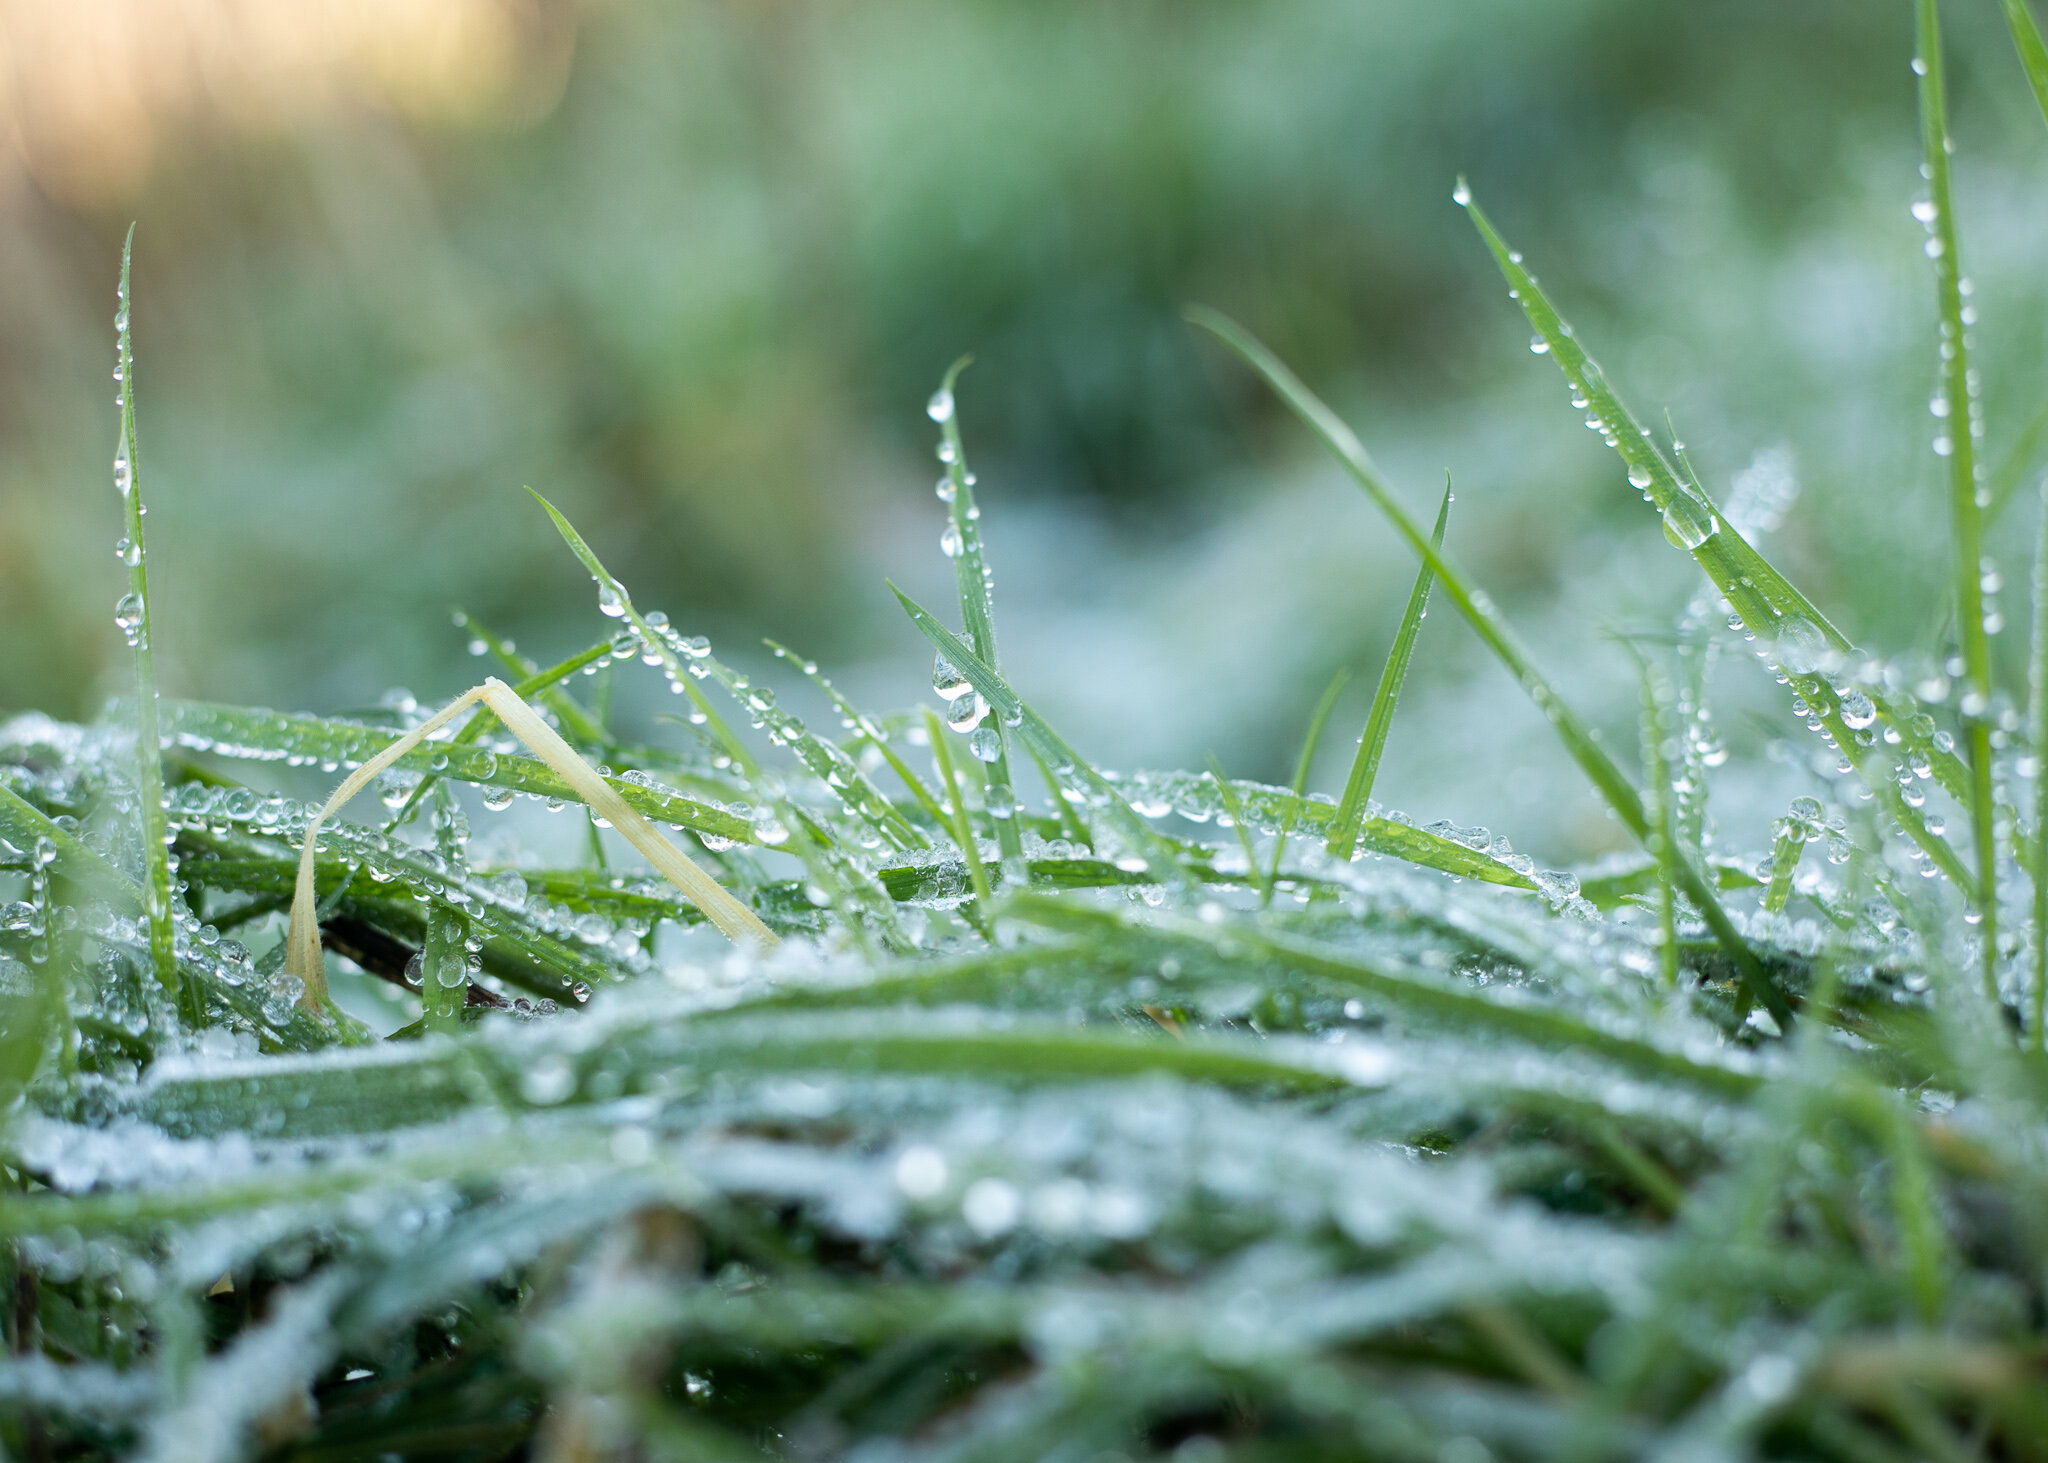 Icy mornings create the perfect opportunity to capture such beautiful details of the nature around us.